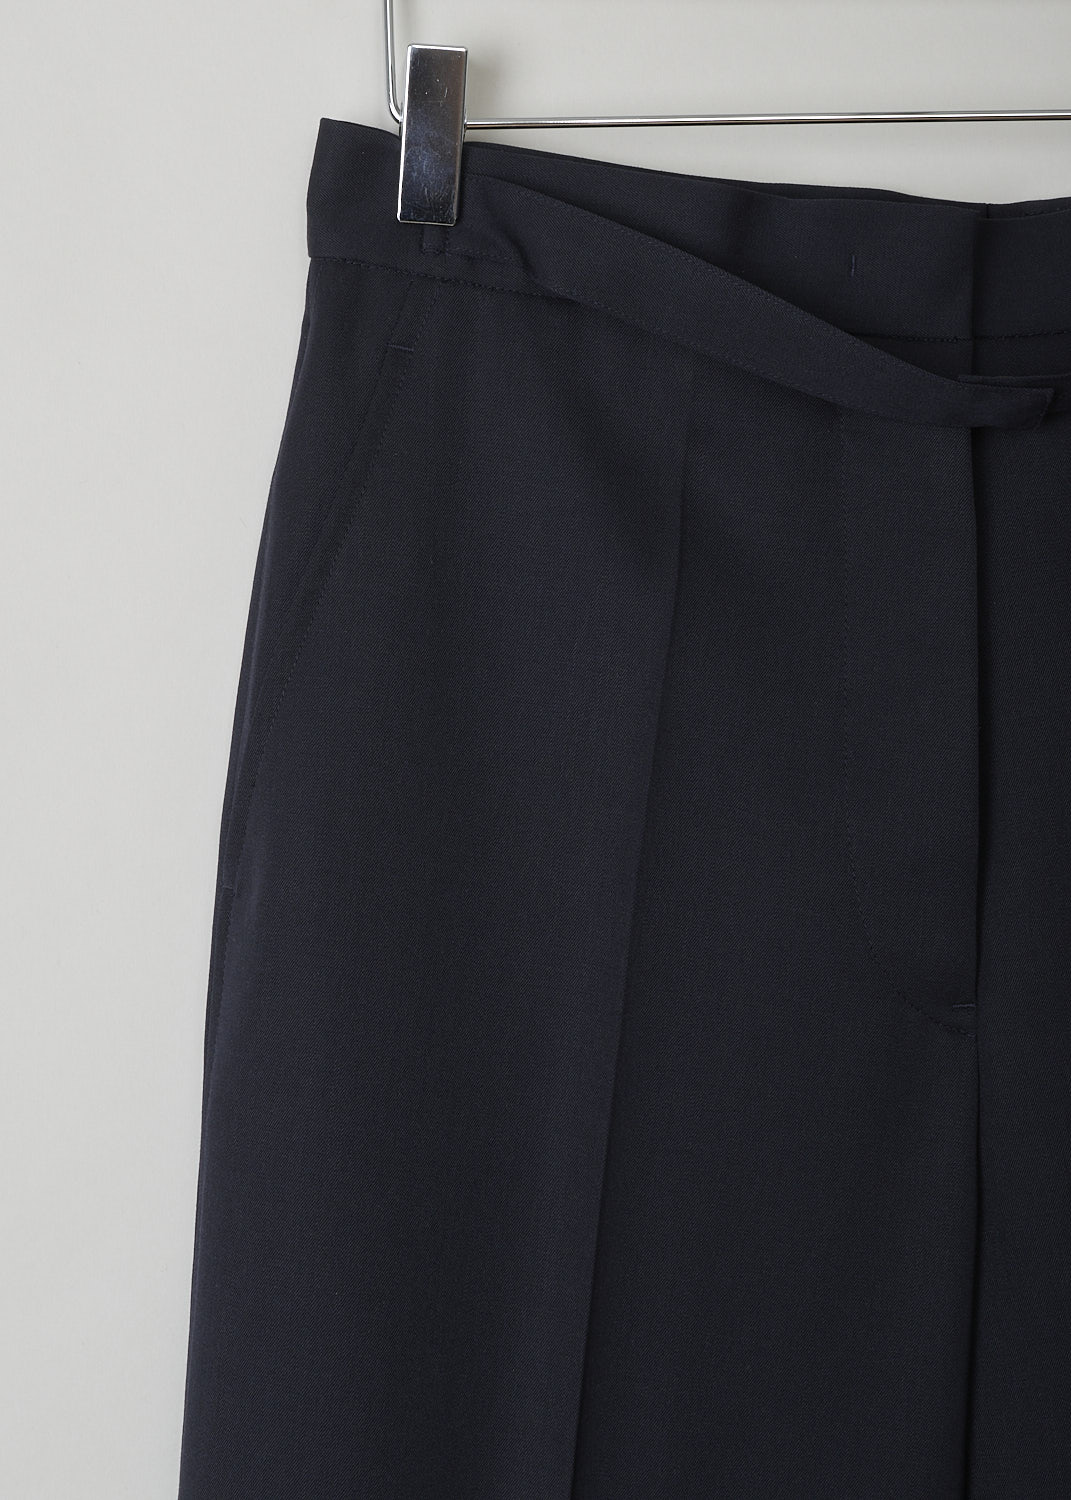 JIL SANDER, MIDNIGHT BLUE WIDE-LEG PANTS, JSPN302220_WN200300_402, Blue, Detail, These navy blue wool pants have a narrow waistband with, attached in the front, a narrow belt-like band with a concealed button closure. These pants have a concealed clasp and button closure. The wide pant legs have pressed creases. These pants have slanted pockets in the front and welt pockets in the back. 
